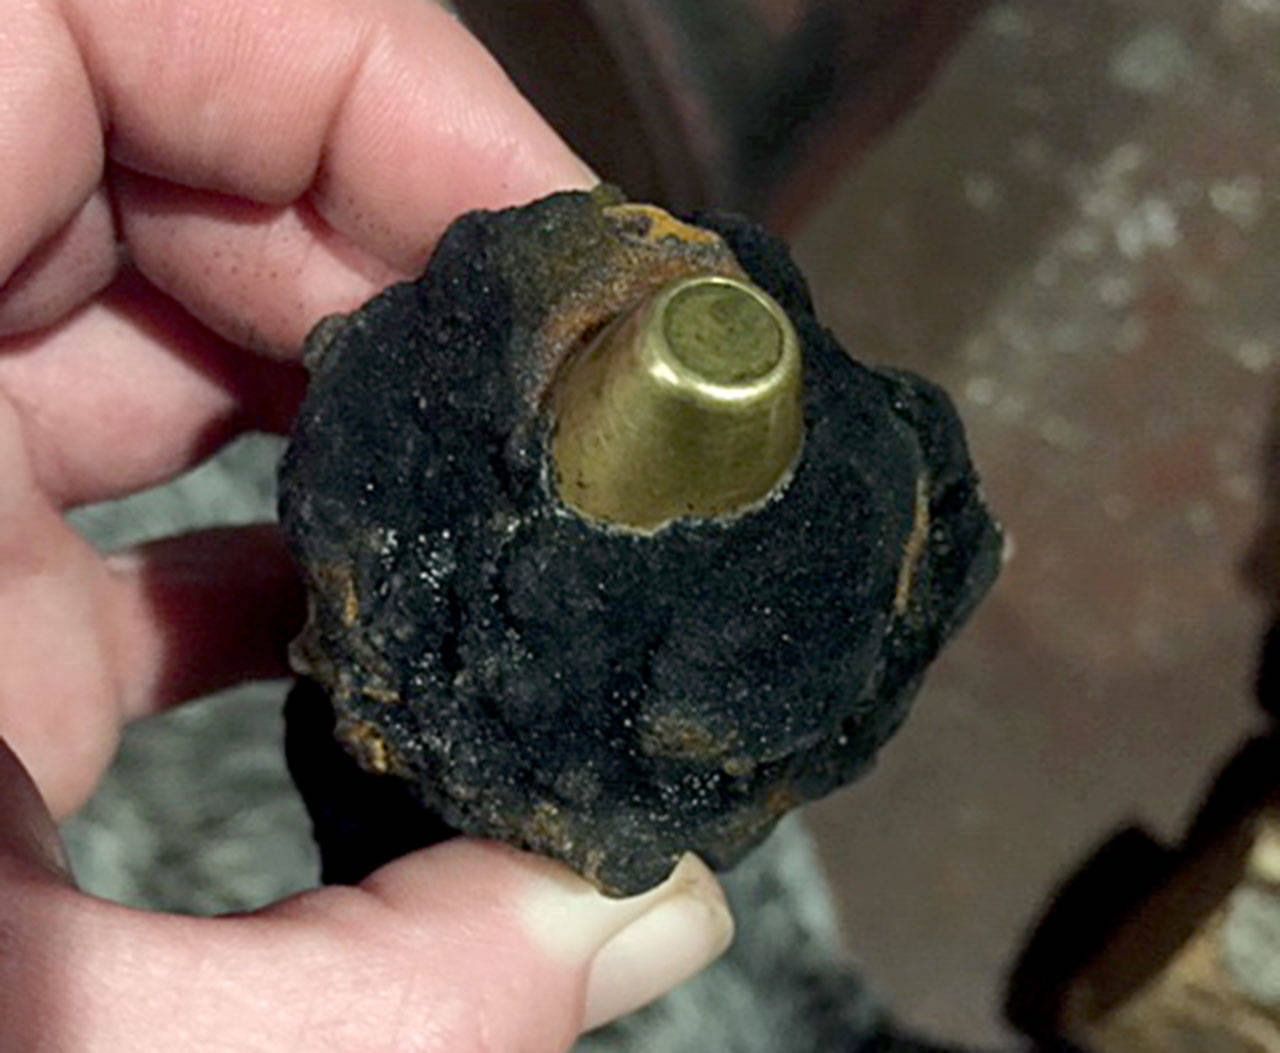 Last year, a person holds unexploded ammunition, likely from World War II anti-aircraft guns, that was found near Pacific Beach. The ordnance again has been found this year. (The Daily World file)